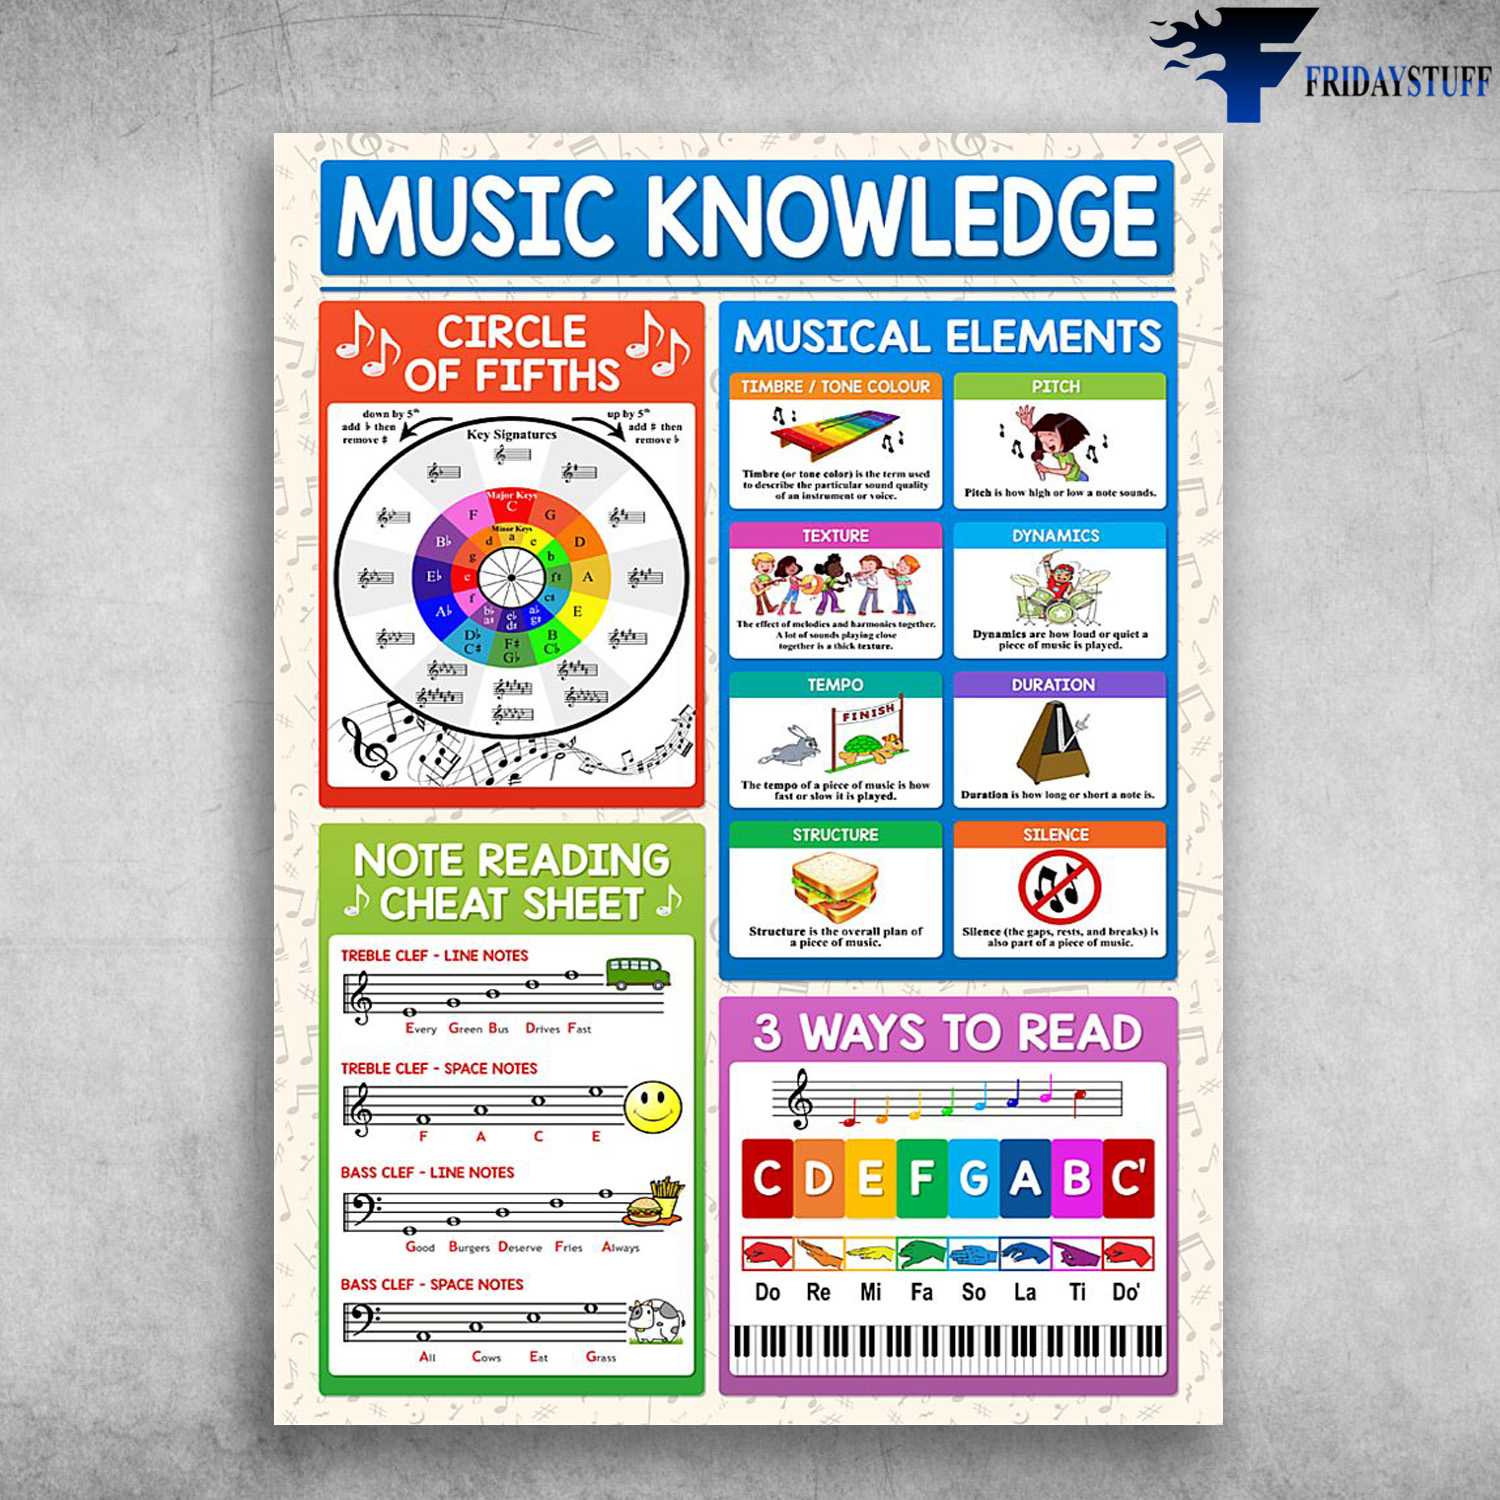 Music Knowledge Circle Of Fifths, Musical Elements, Note Reading Cheat Sheet, 3 Ways To Read